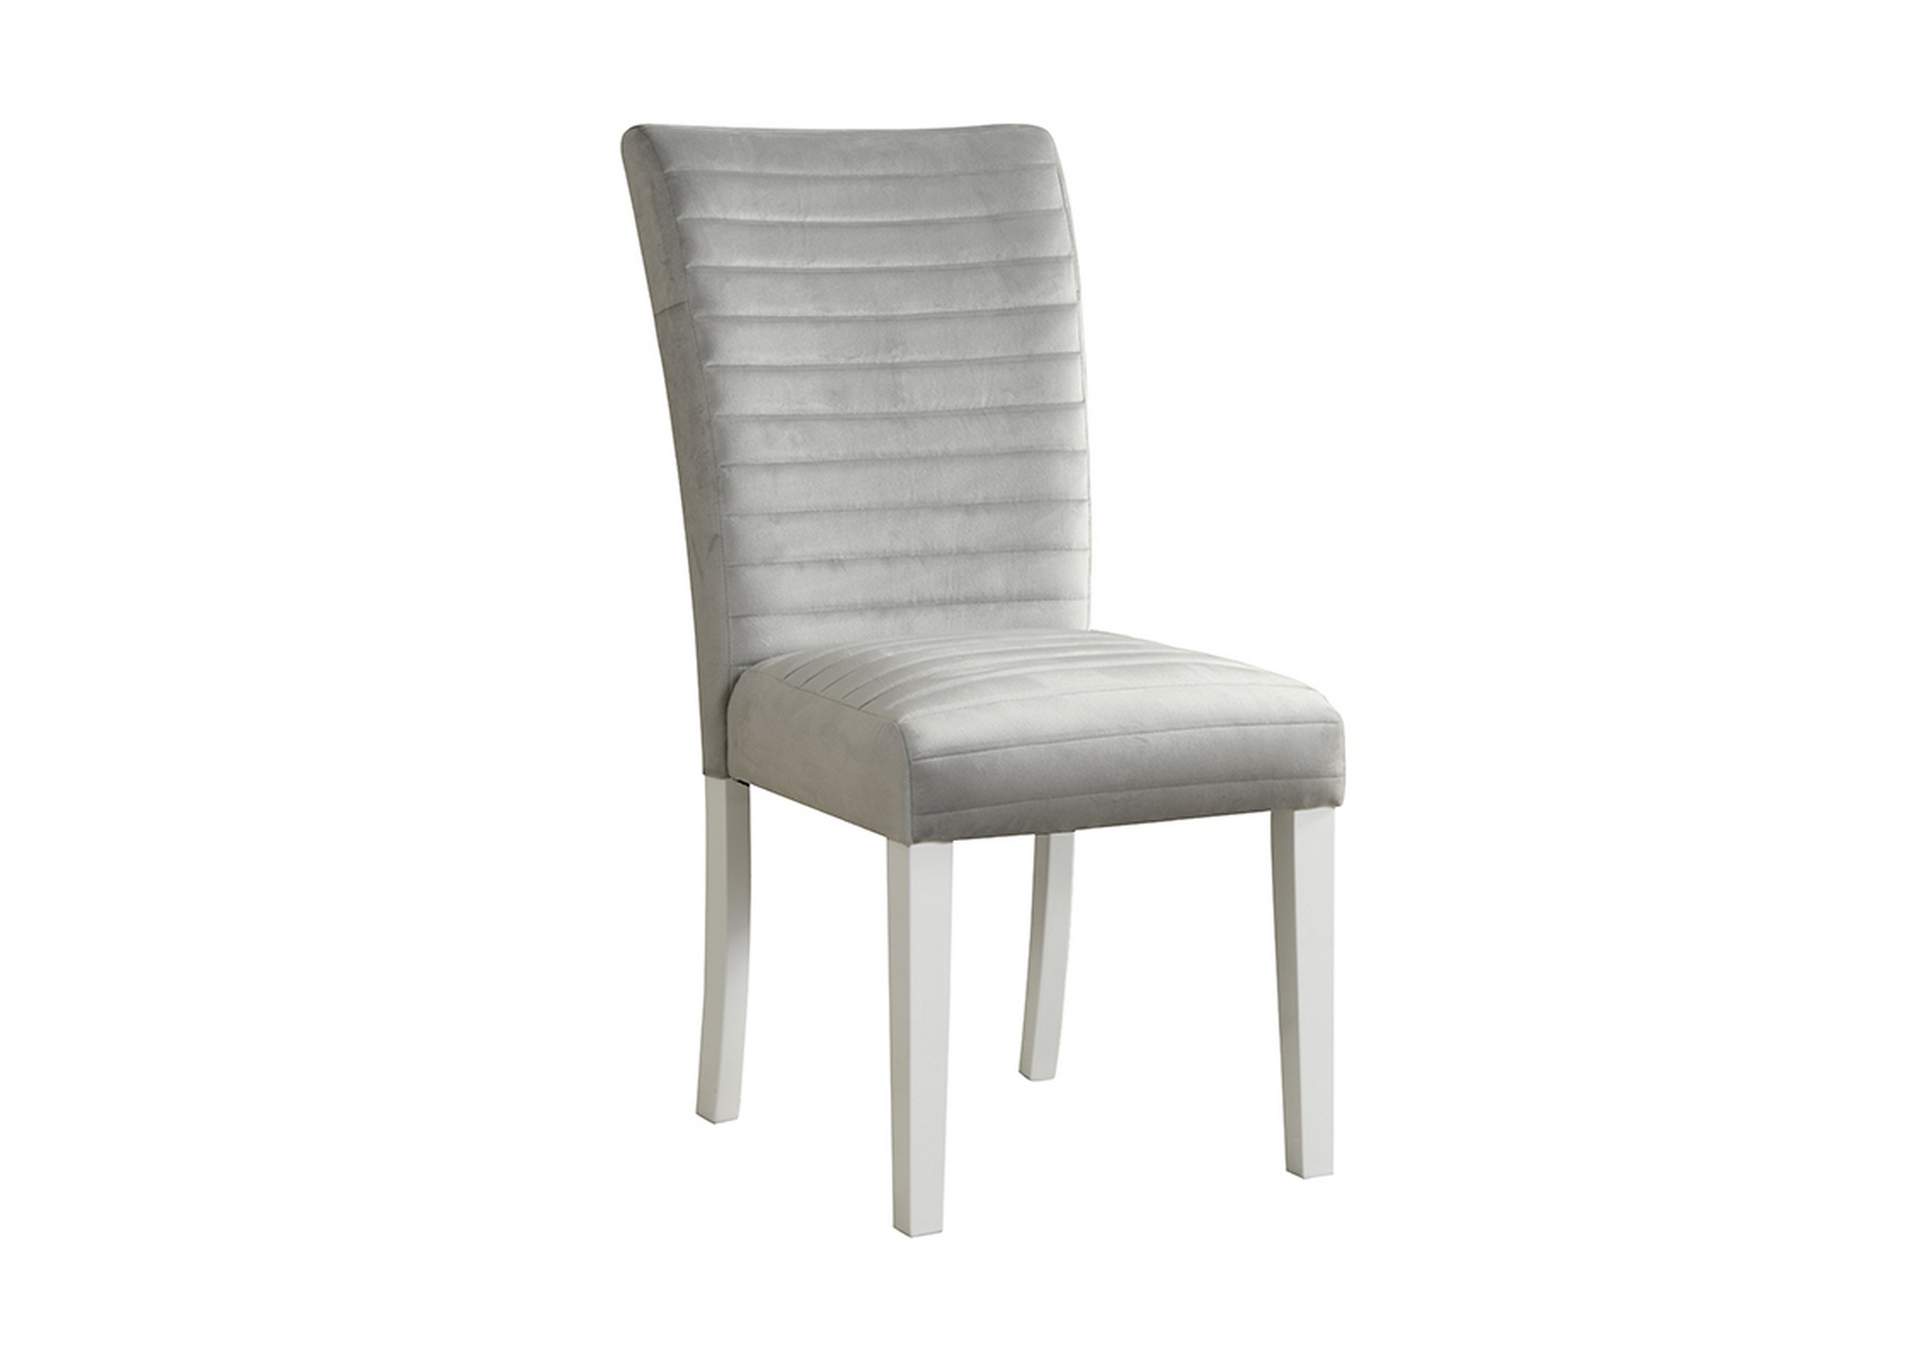 Grey/Silver Dining Chair [Set of 2],Global Furniture USA